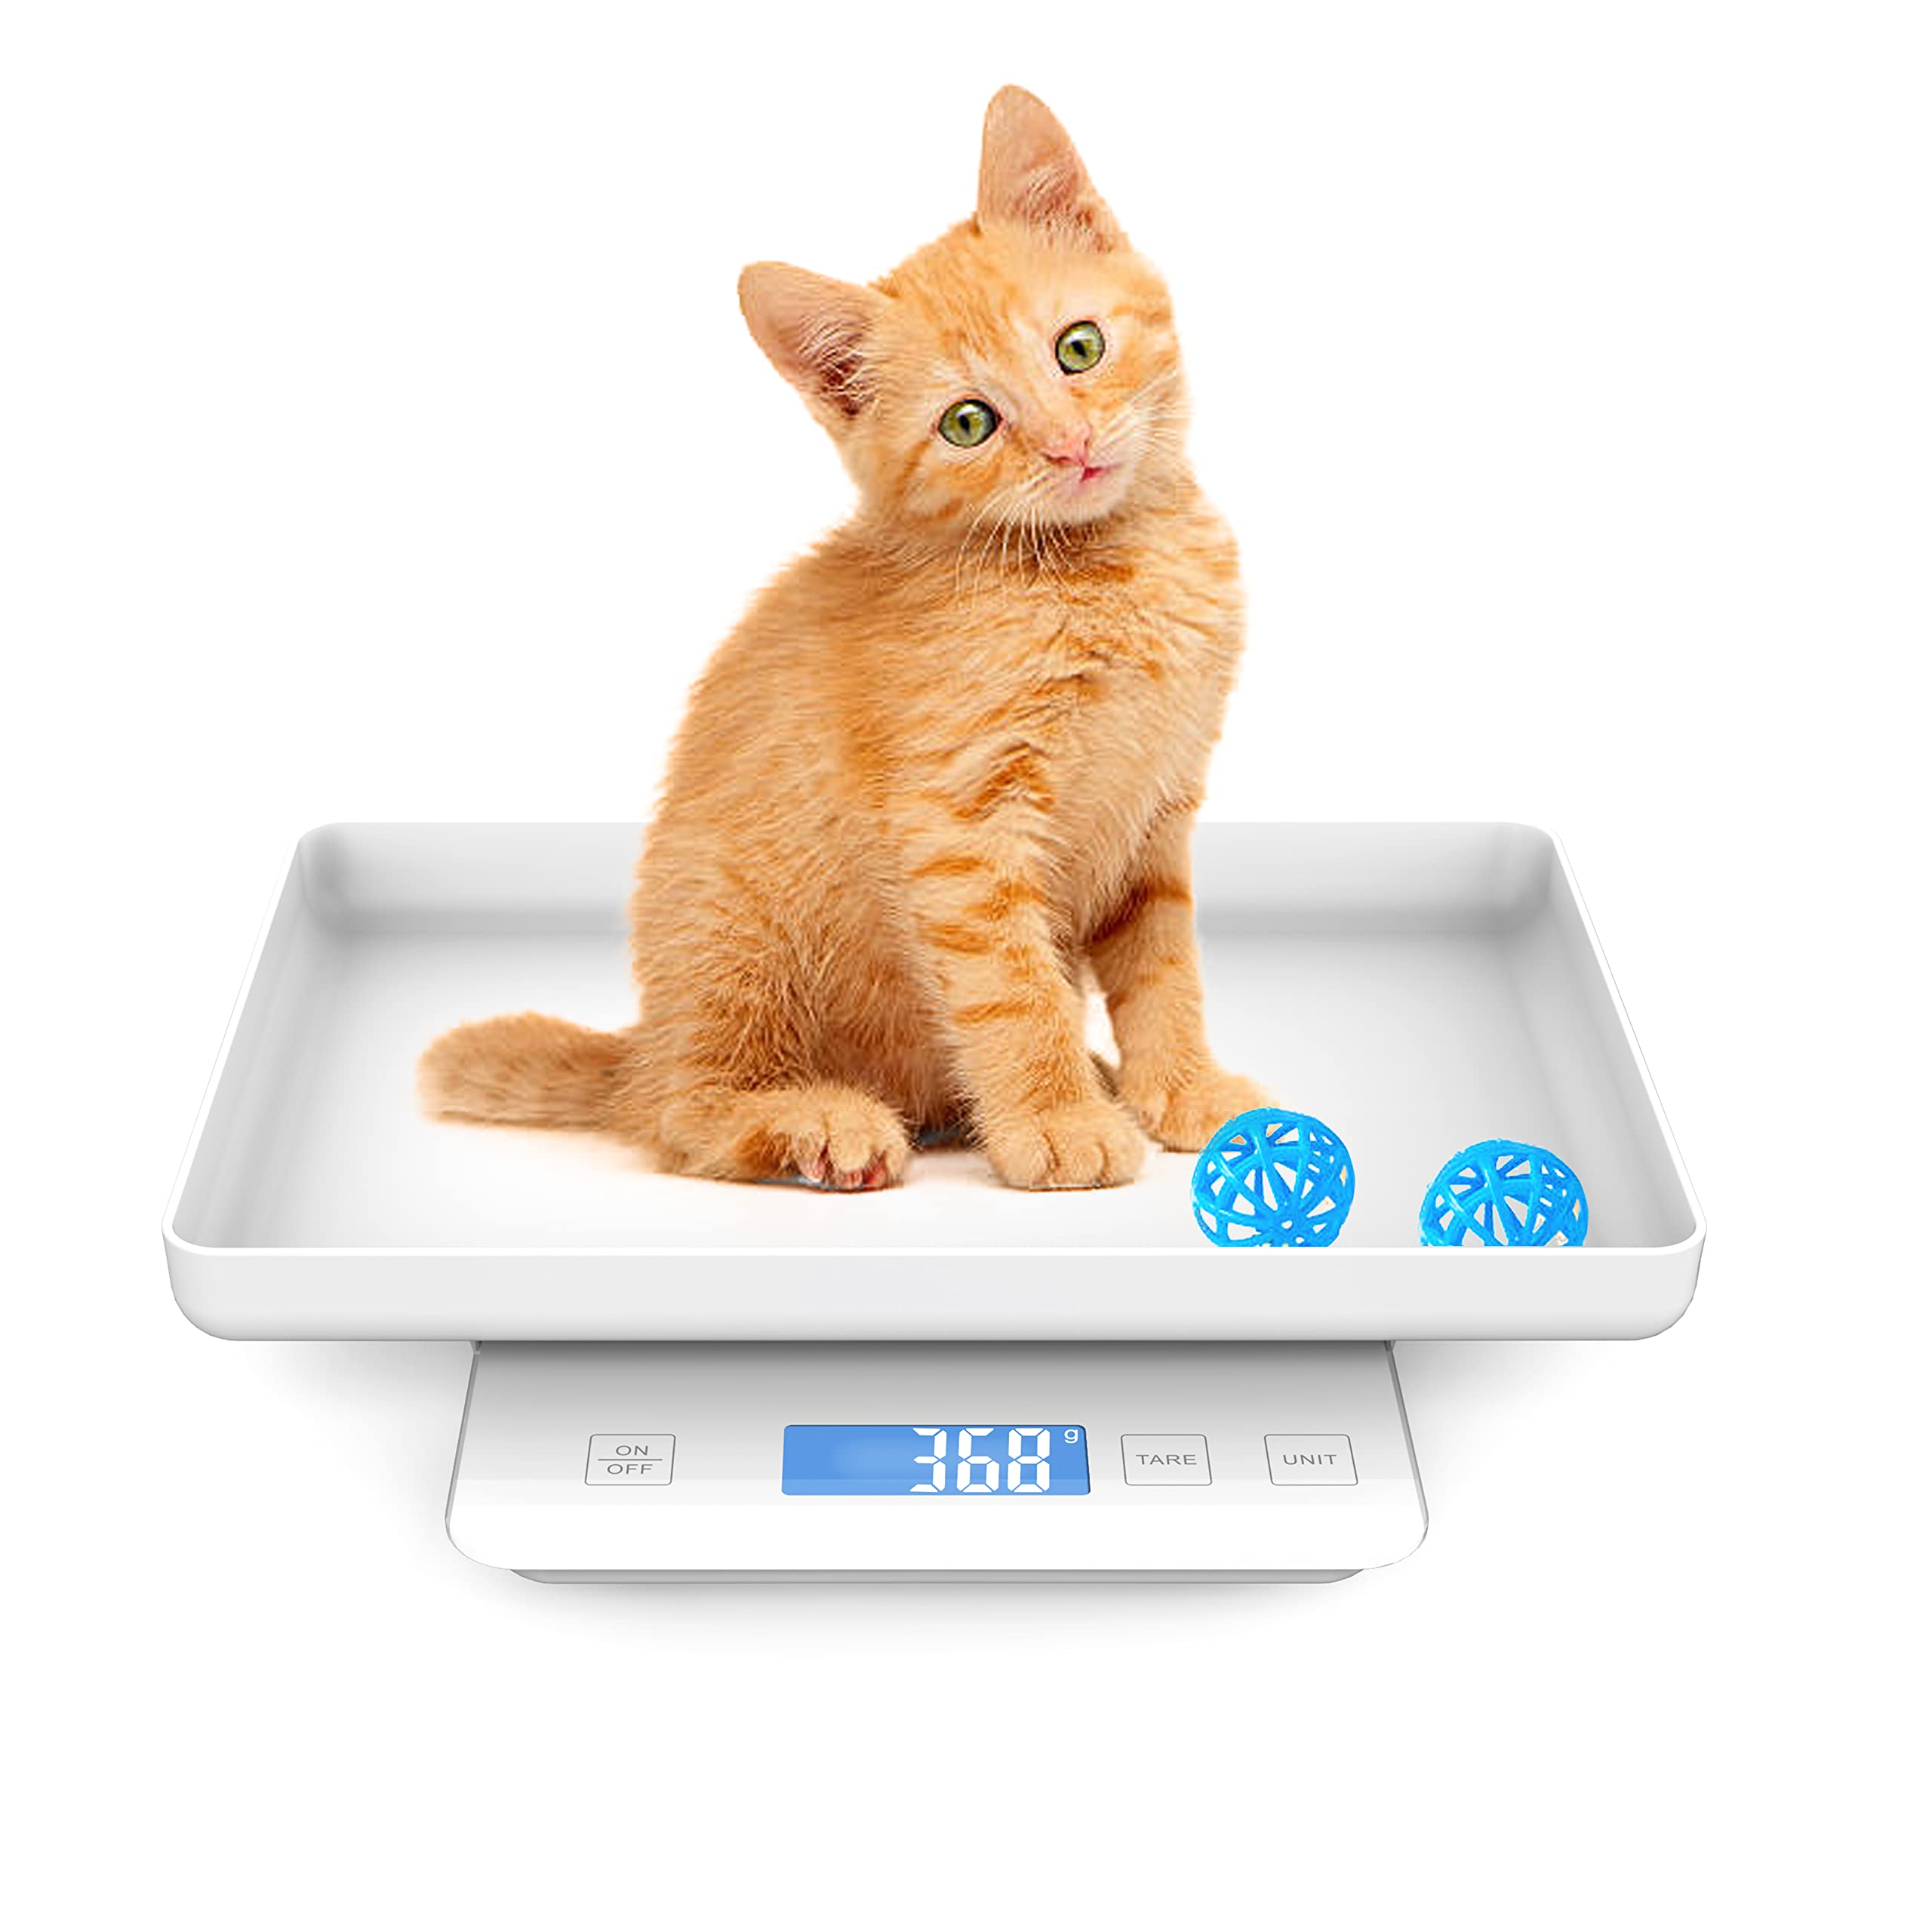 Newborn Pet Scale for Puppy and Kitten, Pet Scale with Detachable Tray for Dog Whelping Nursing, Weigh Pets Baby in Grams, 33lbs (0.03oz), Size 11x